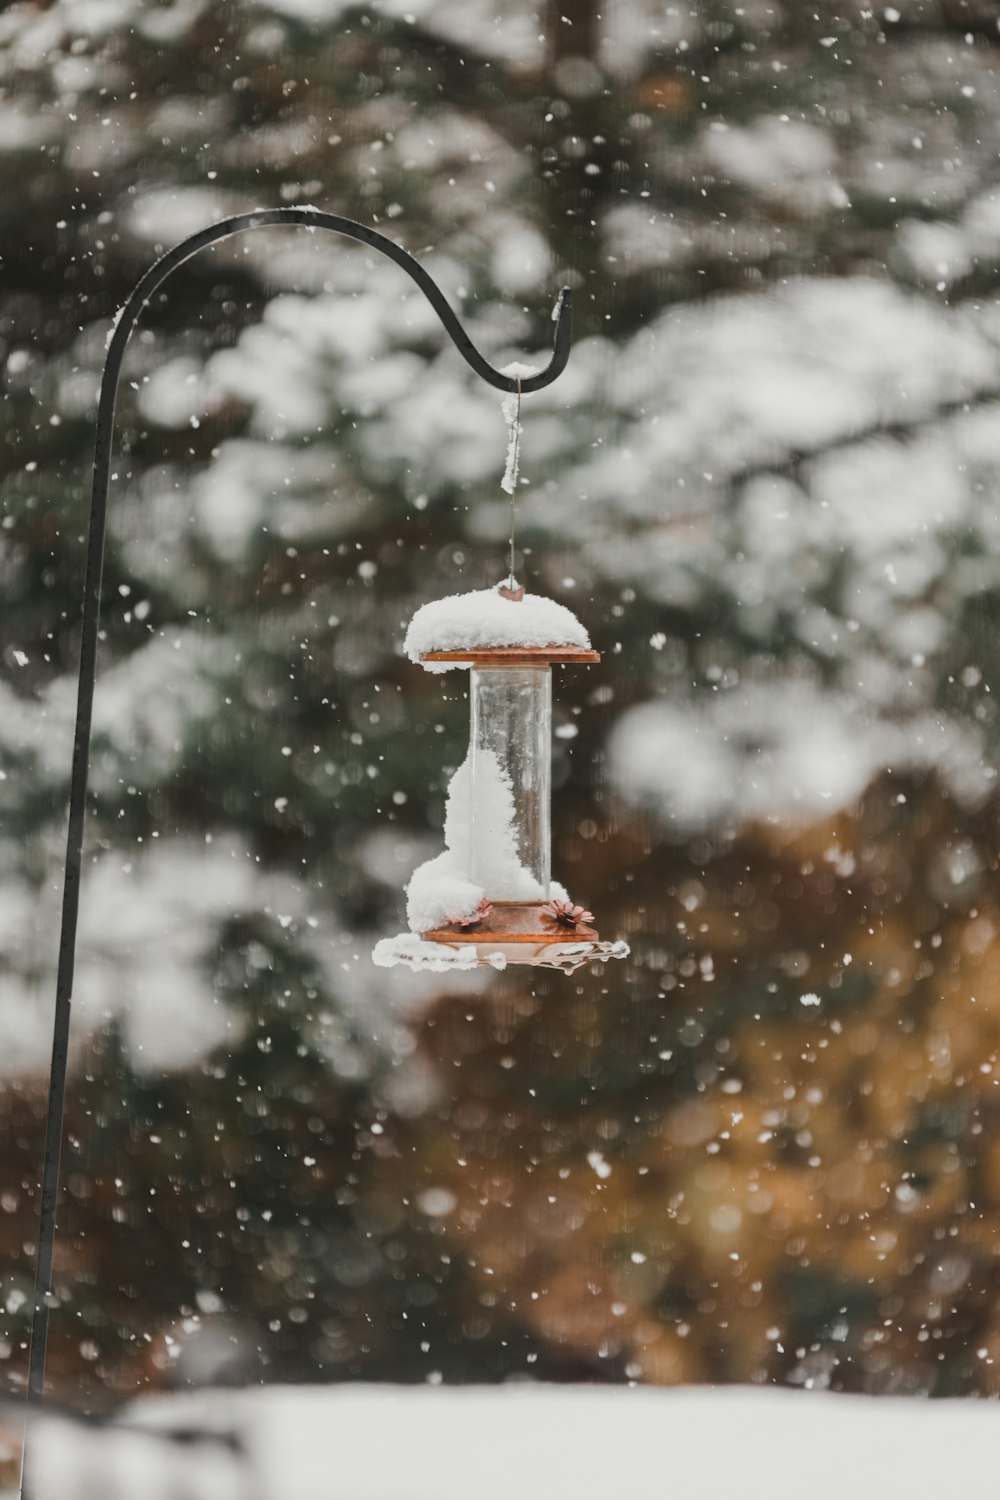 a bird feeder hanging from a pole in the snow